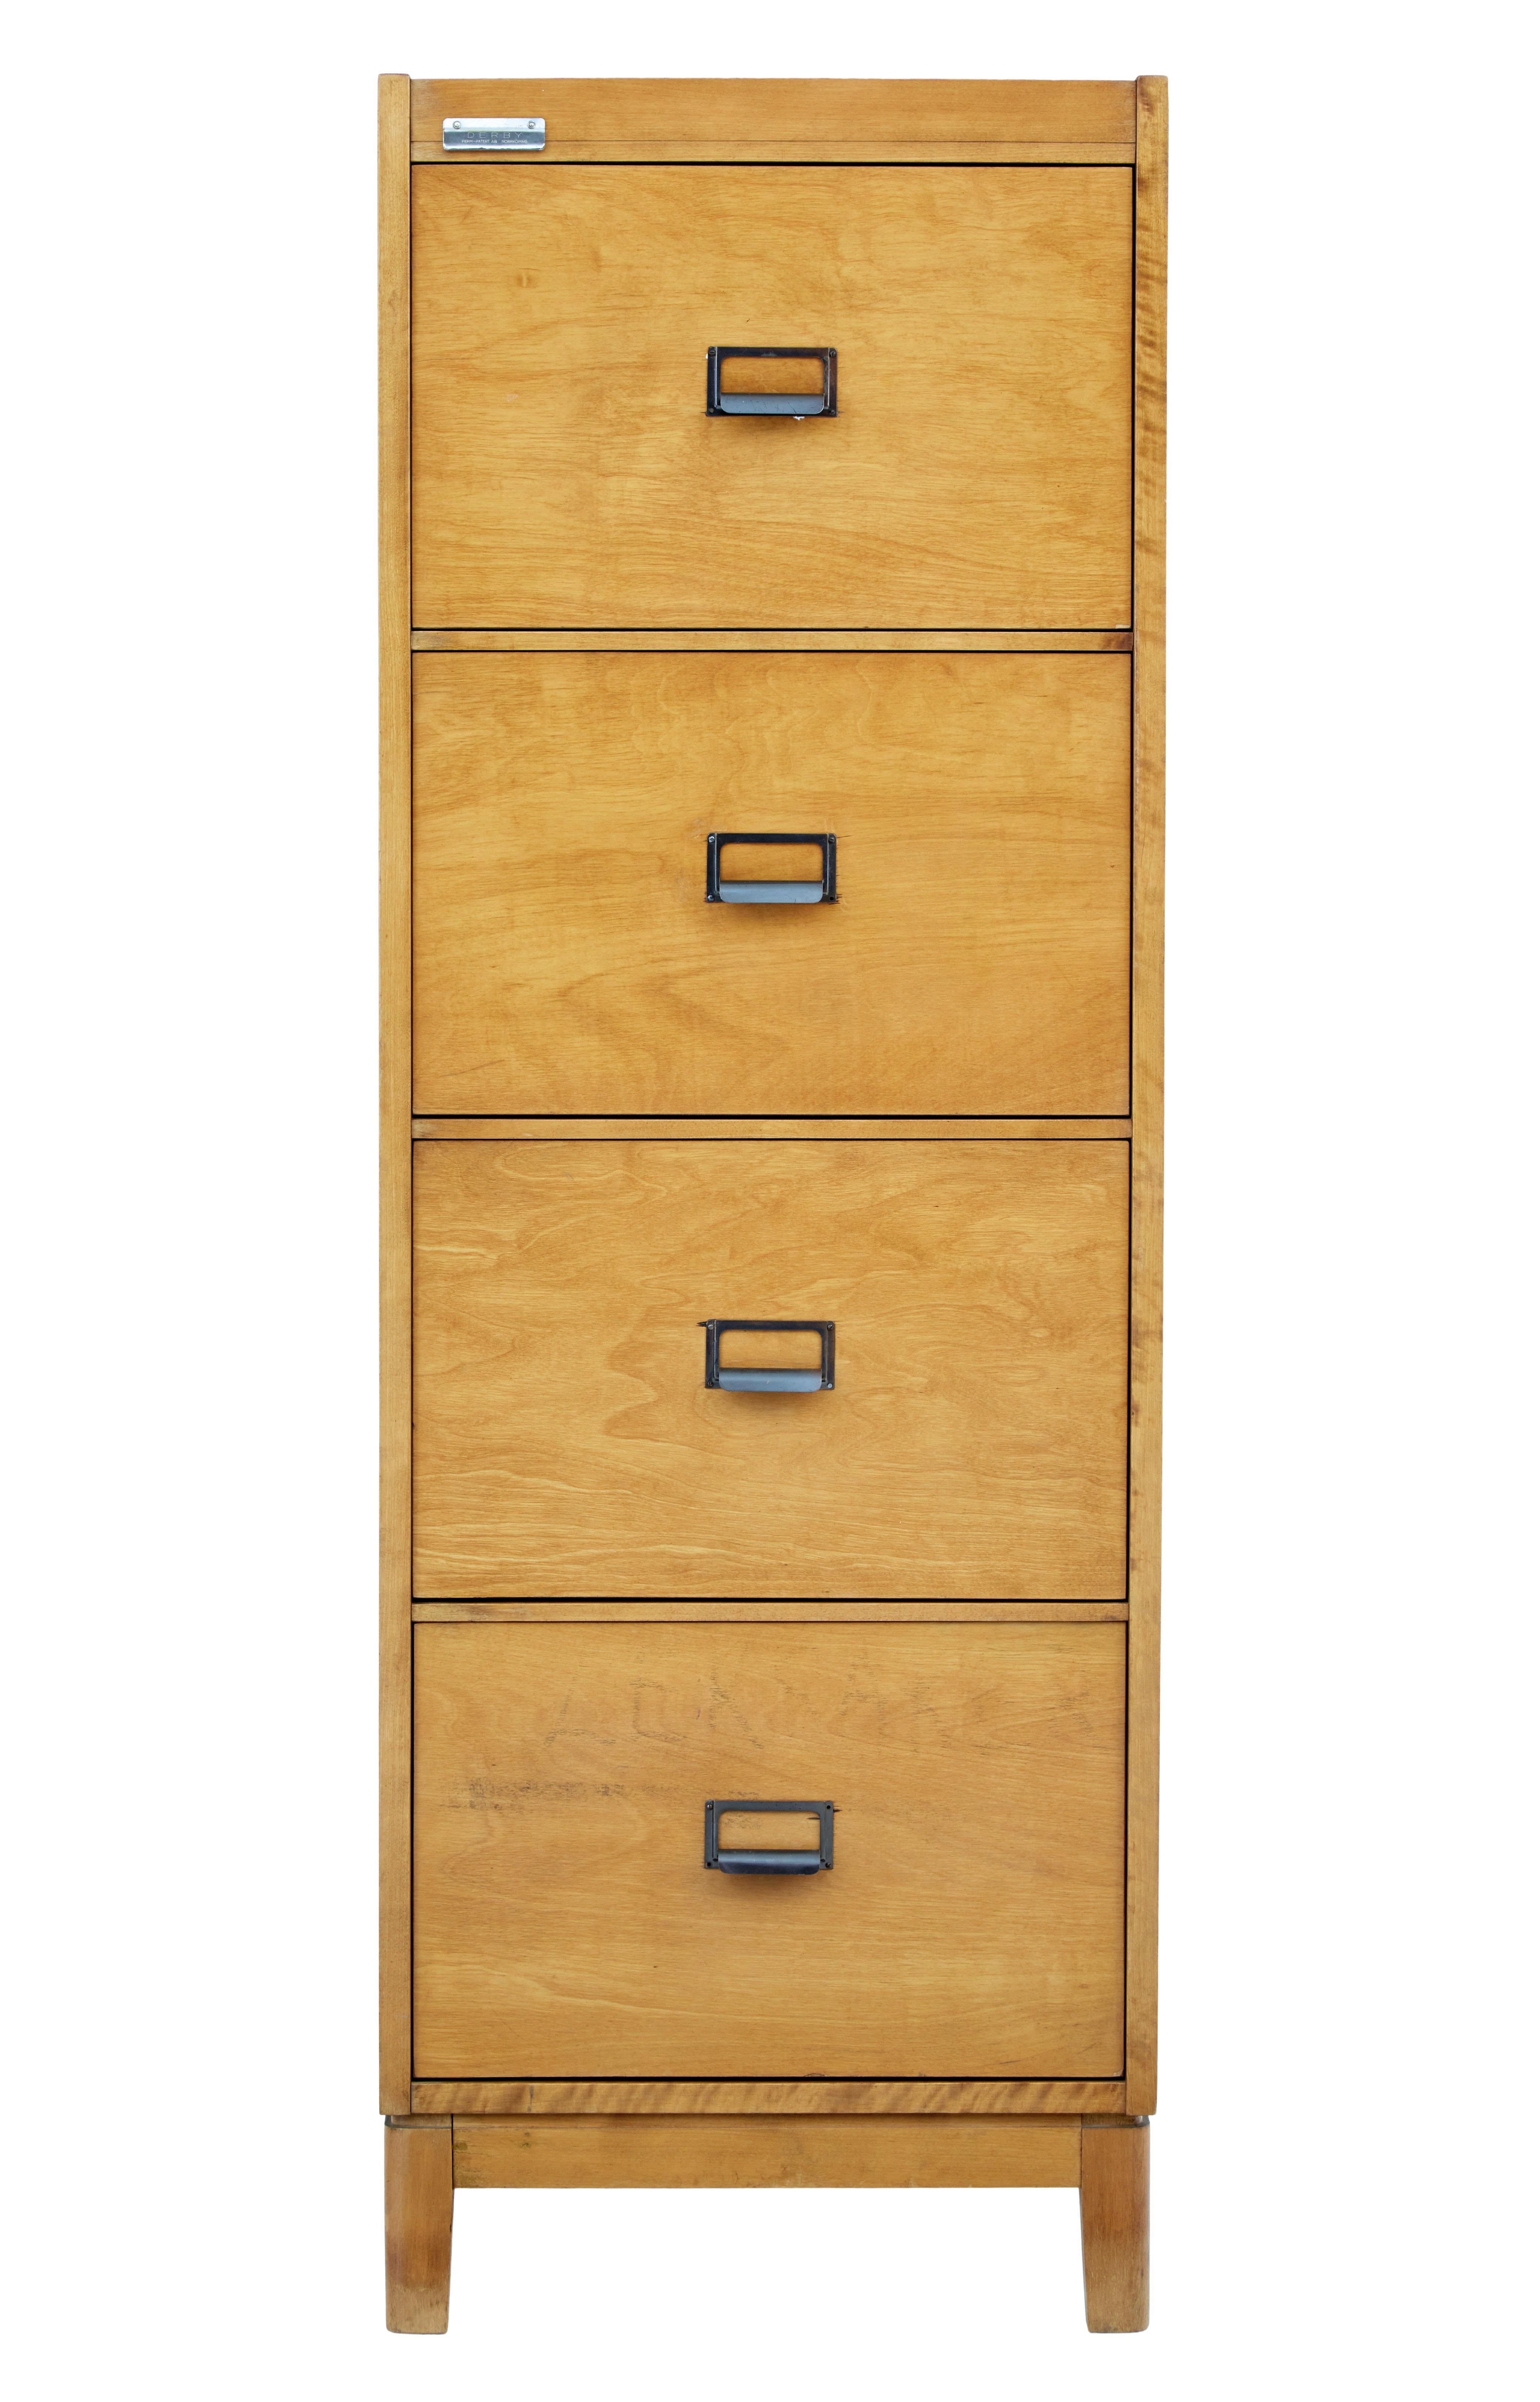 Fine piece of functional office furniture with the Scandinavian touch, circa 1950.

4 deep standard file size drawers, with metal handle and label attachment. Side with contrasting darker birch veneered sides.

Minor surface marks, 1 very small